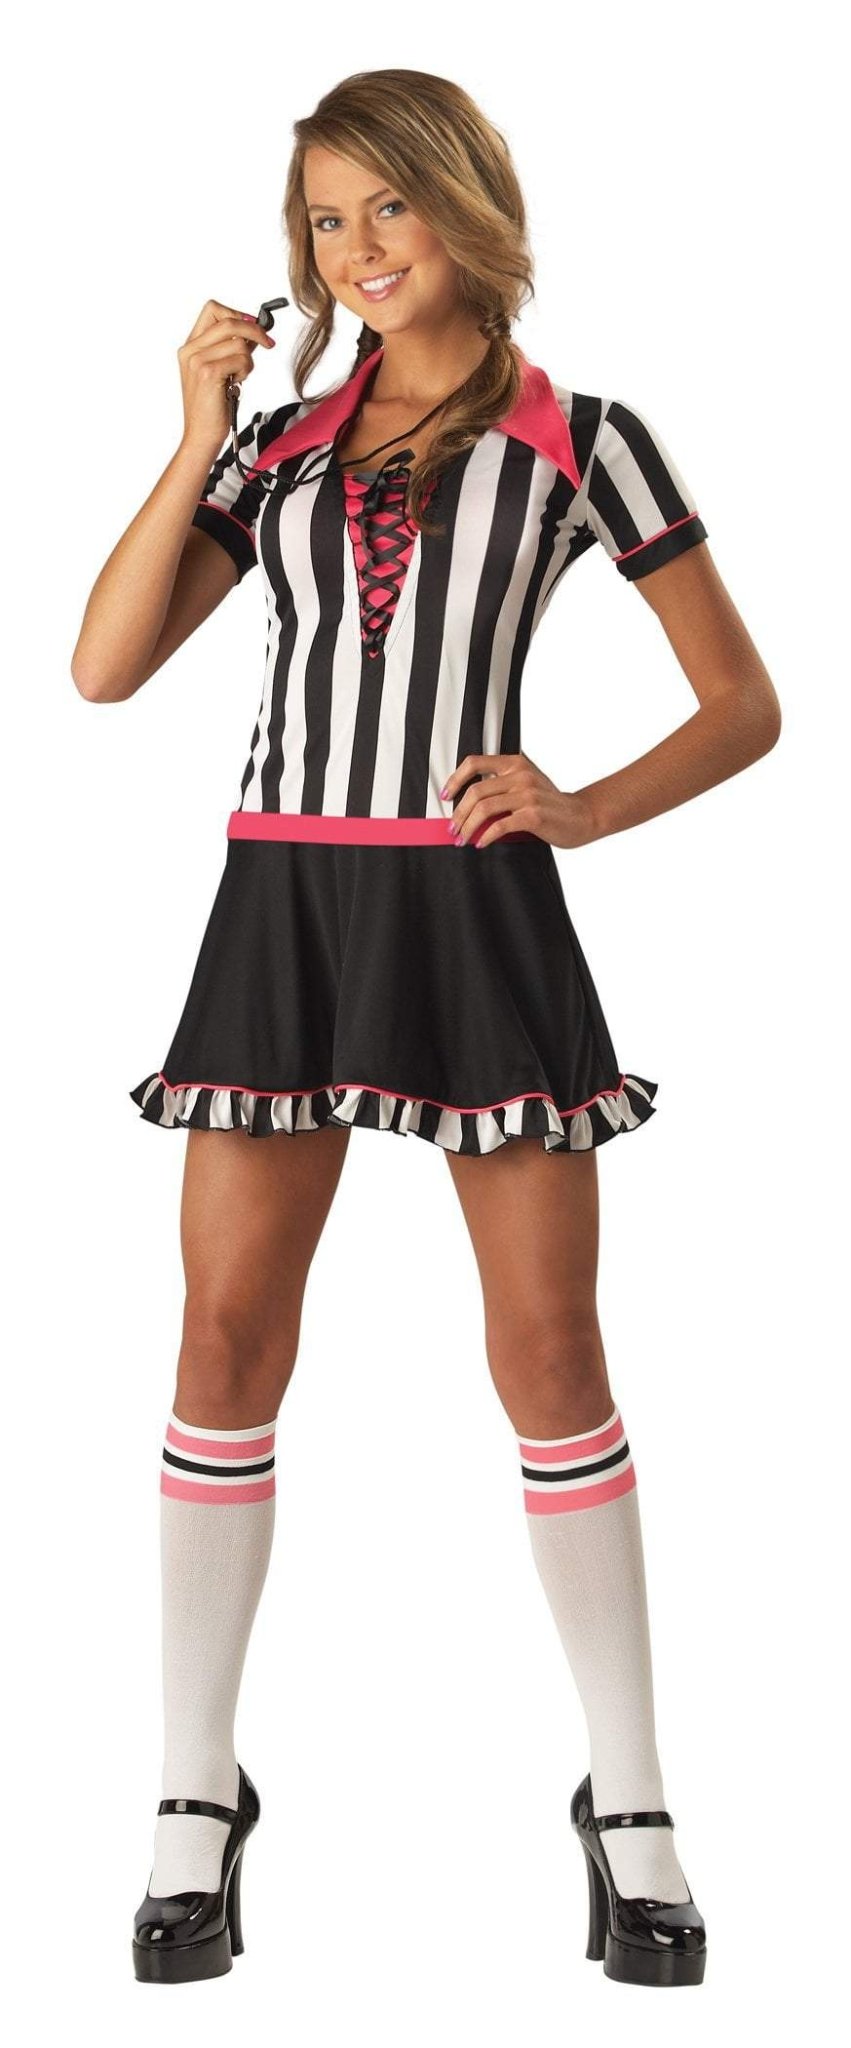 Teen Girls Racy Referee Costume - JJ's Party House